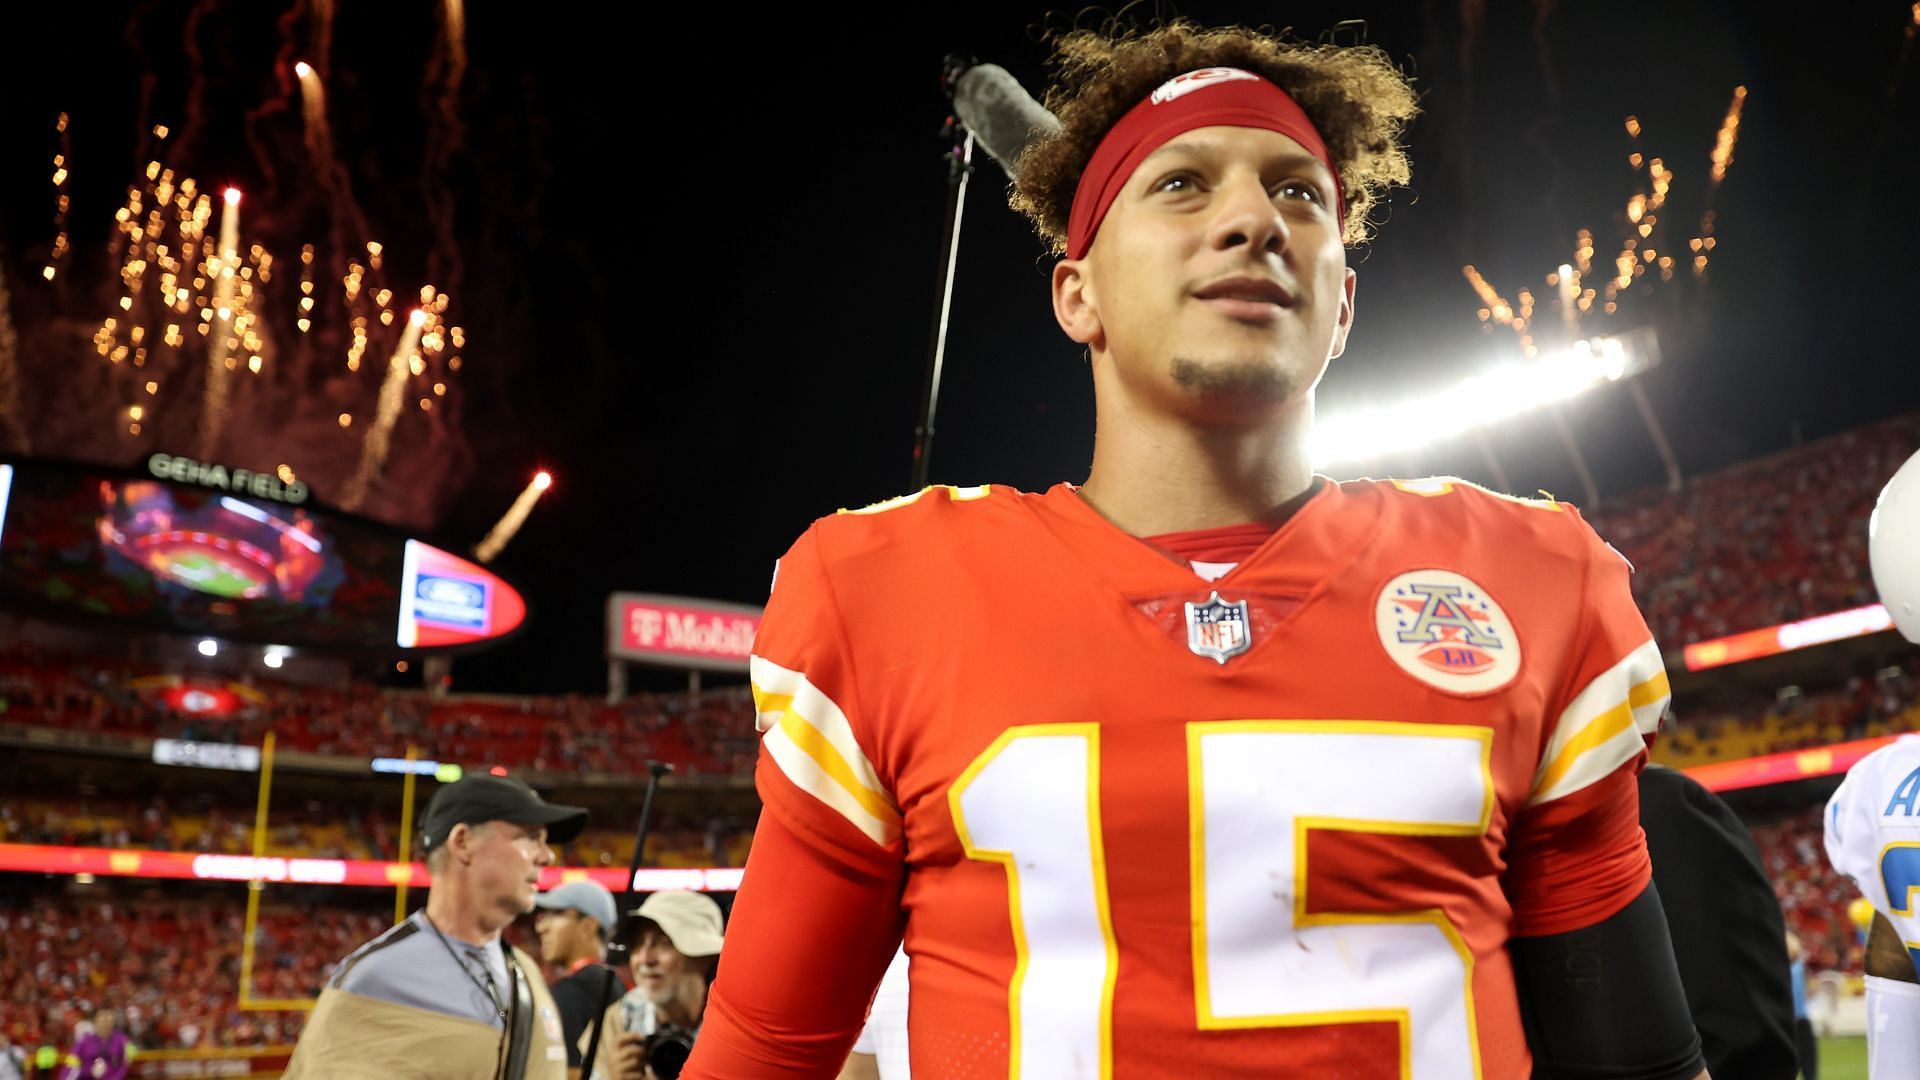 Here are five NFL players who were drafted by MLB teams ft. Tom Brady, Patrick Mahomes, and more